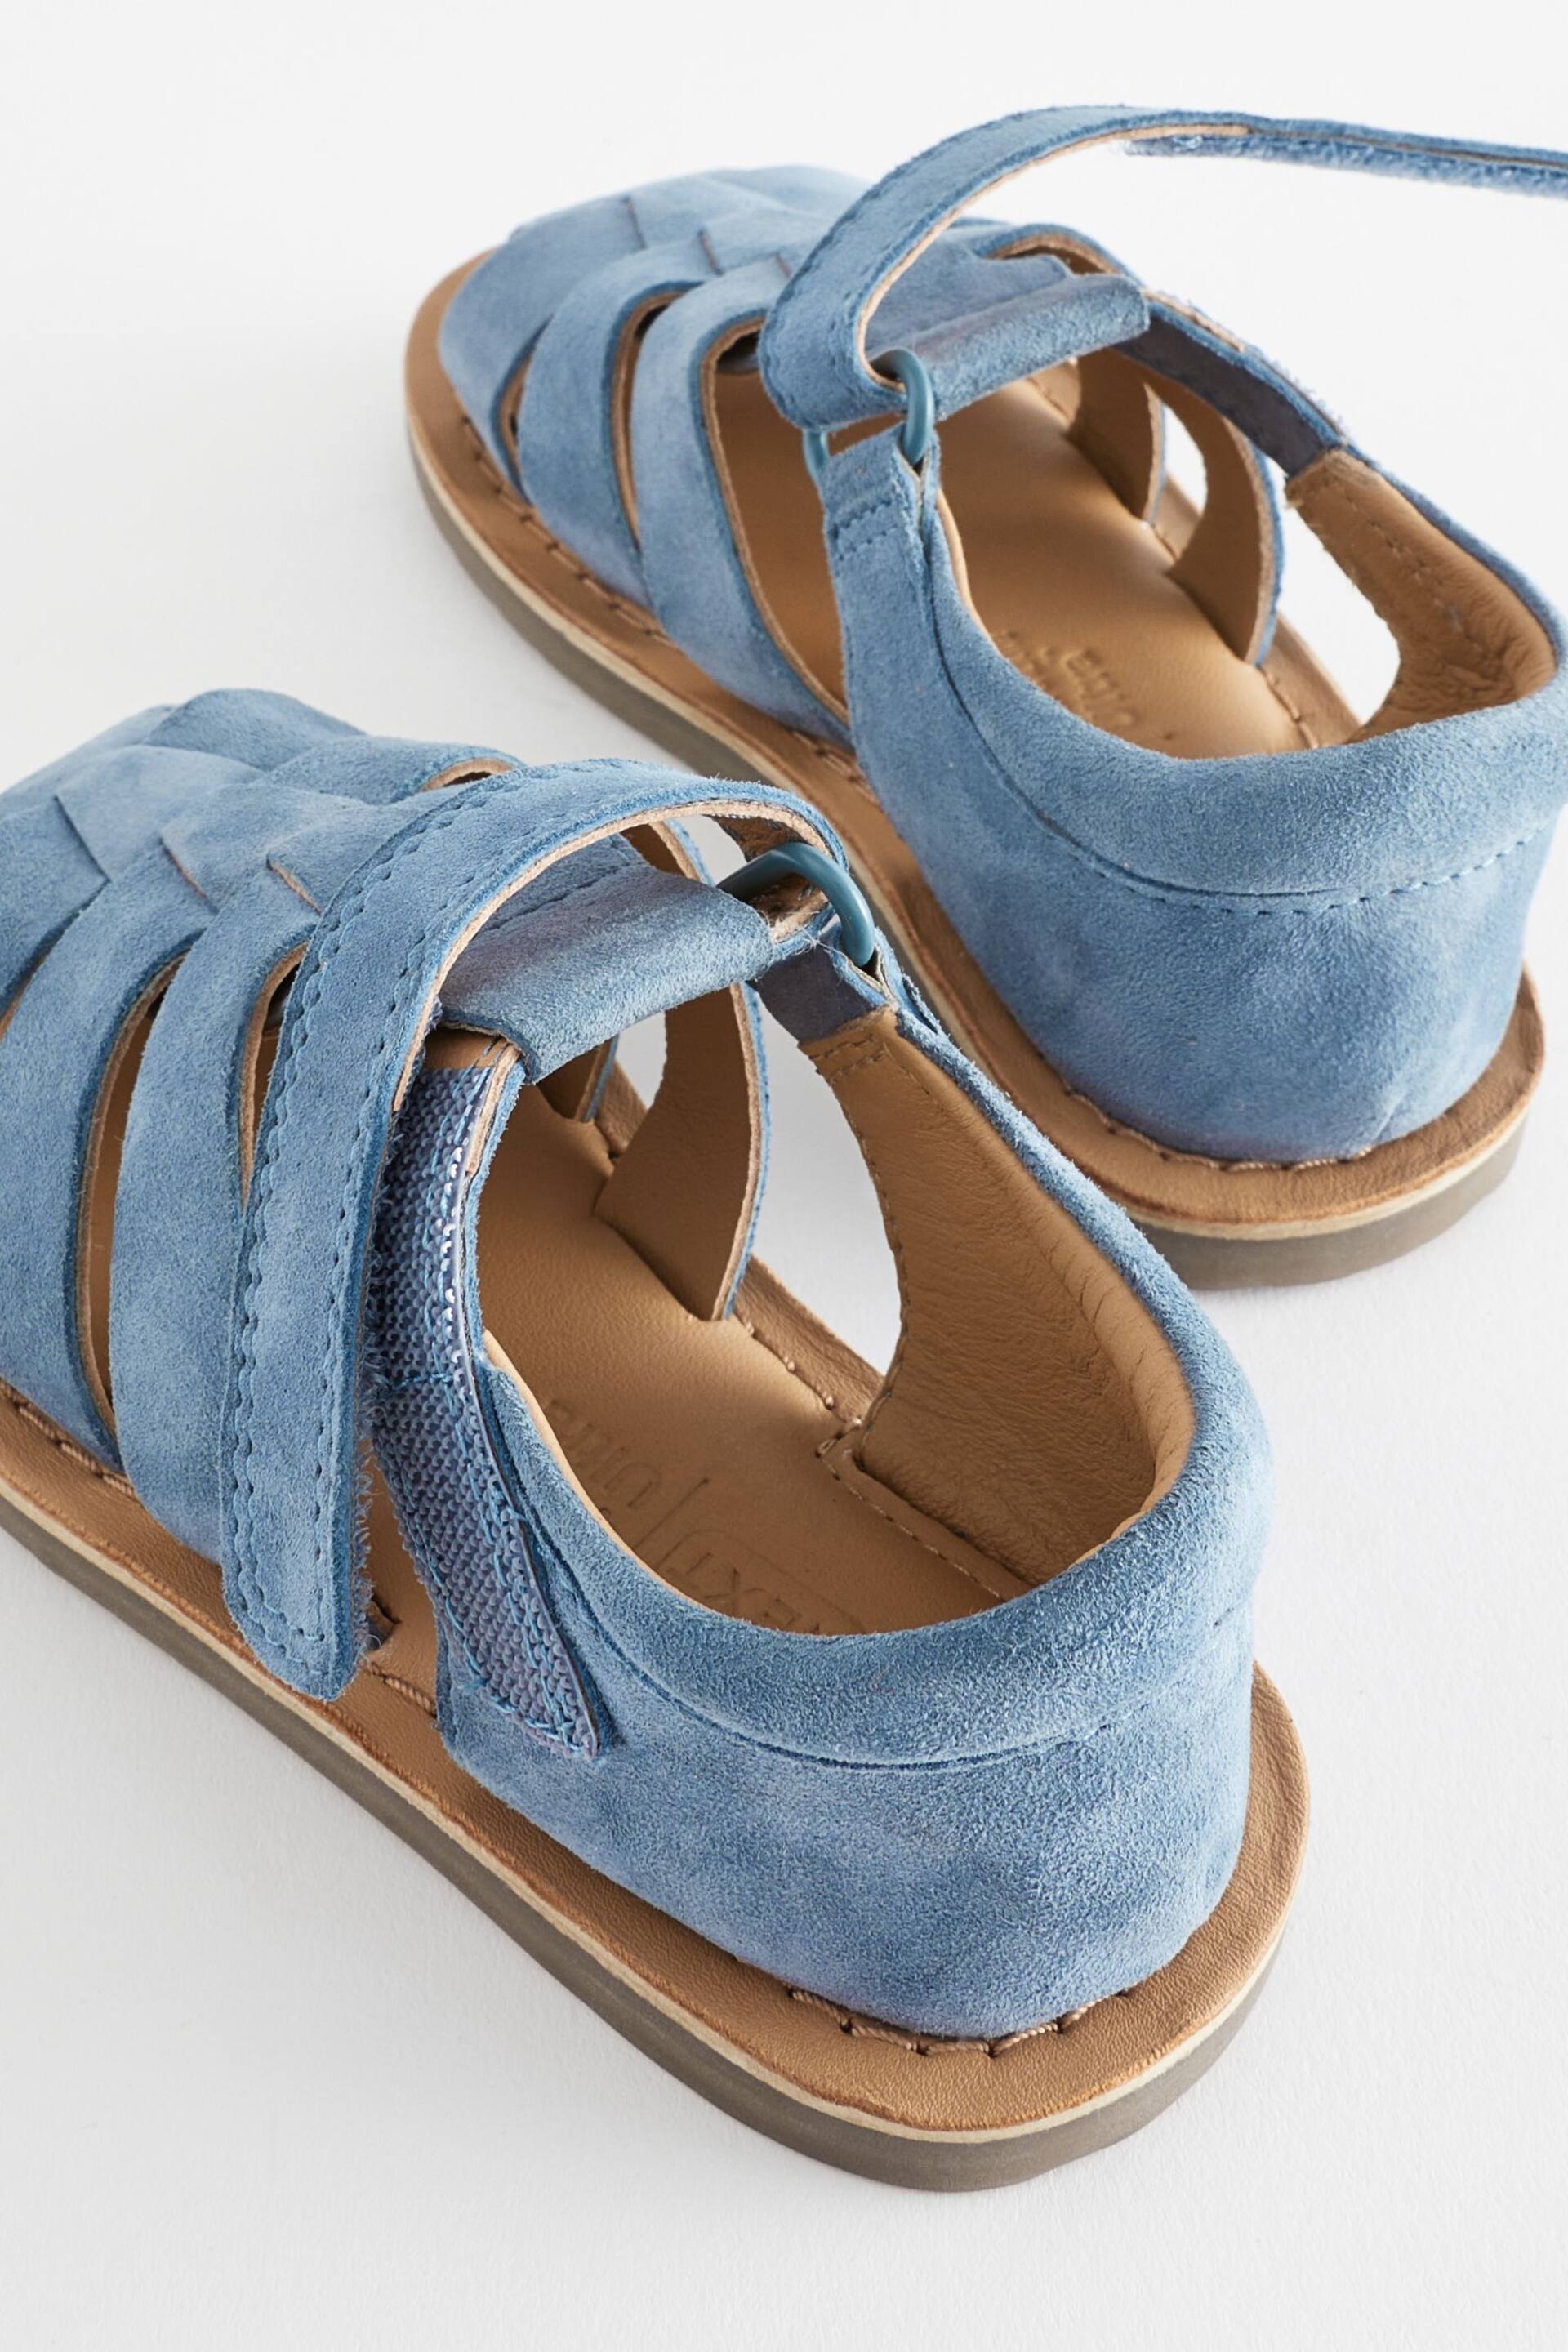 Blue Leather Closed Toe Touch Fastening Sandals - Image 7 of 7